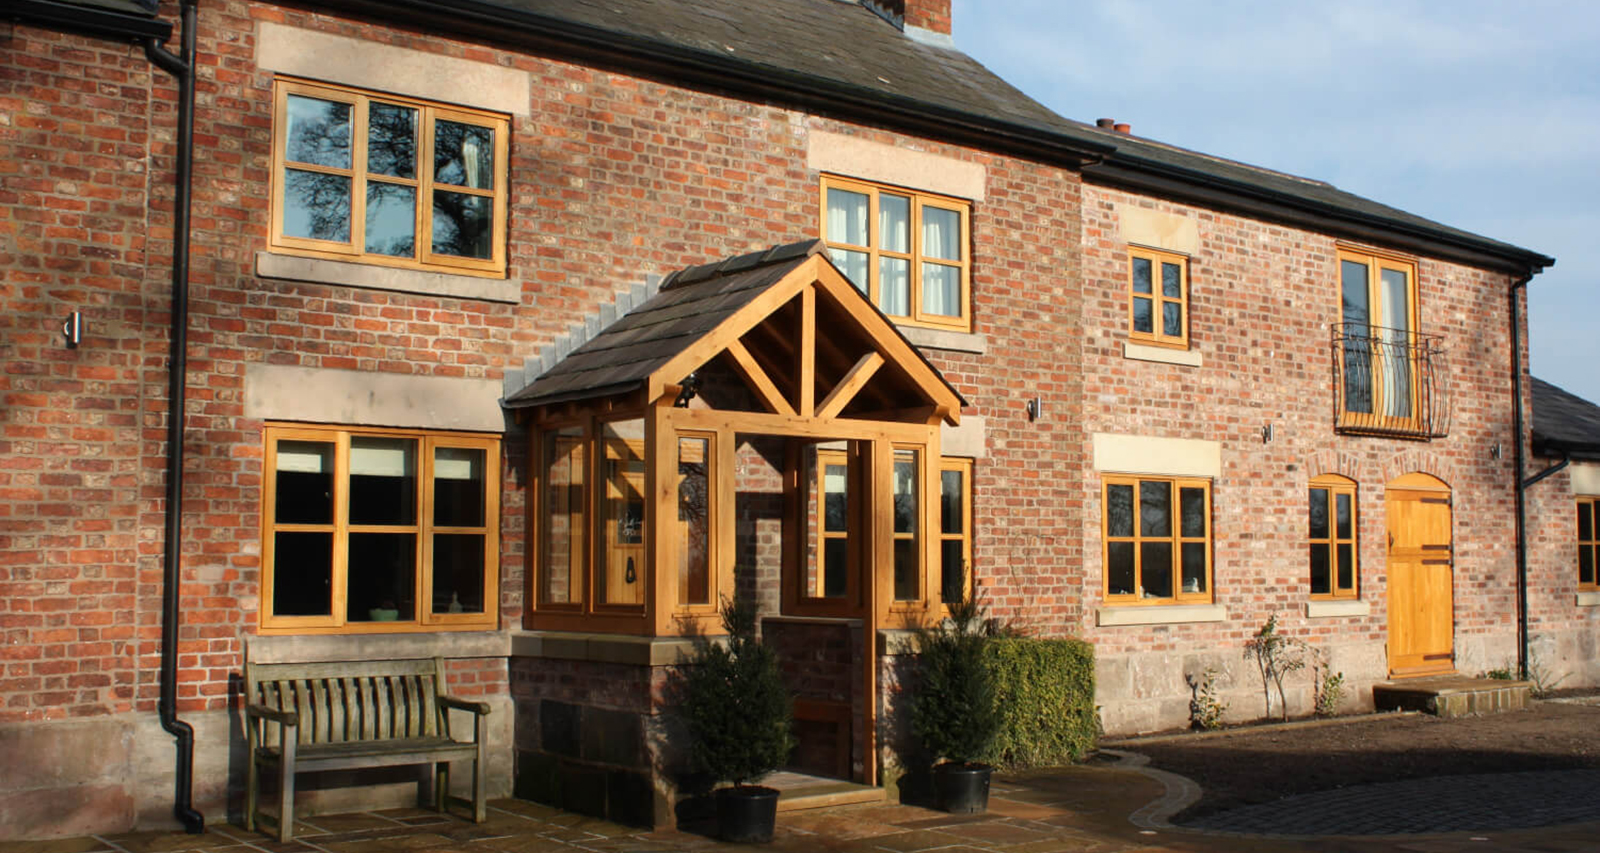 How To Choose The Right Oak Framed Porch For Your Home